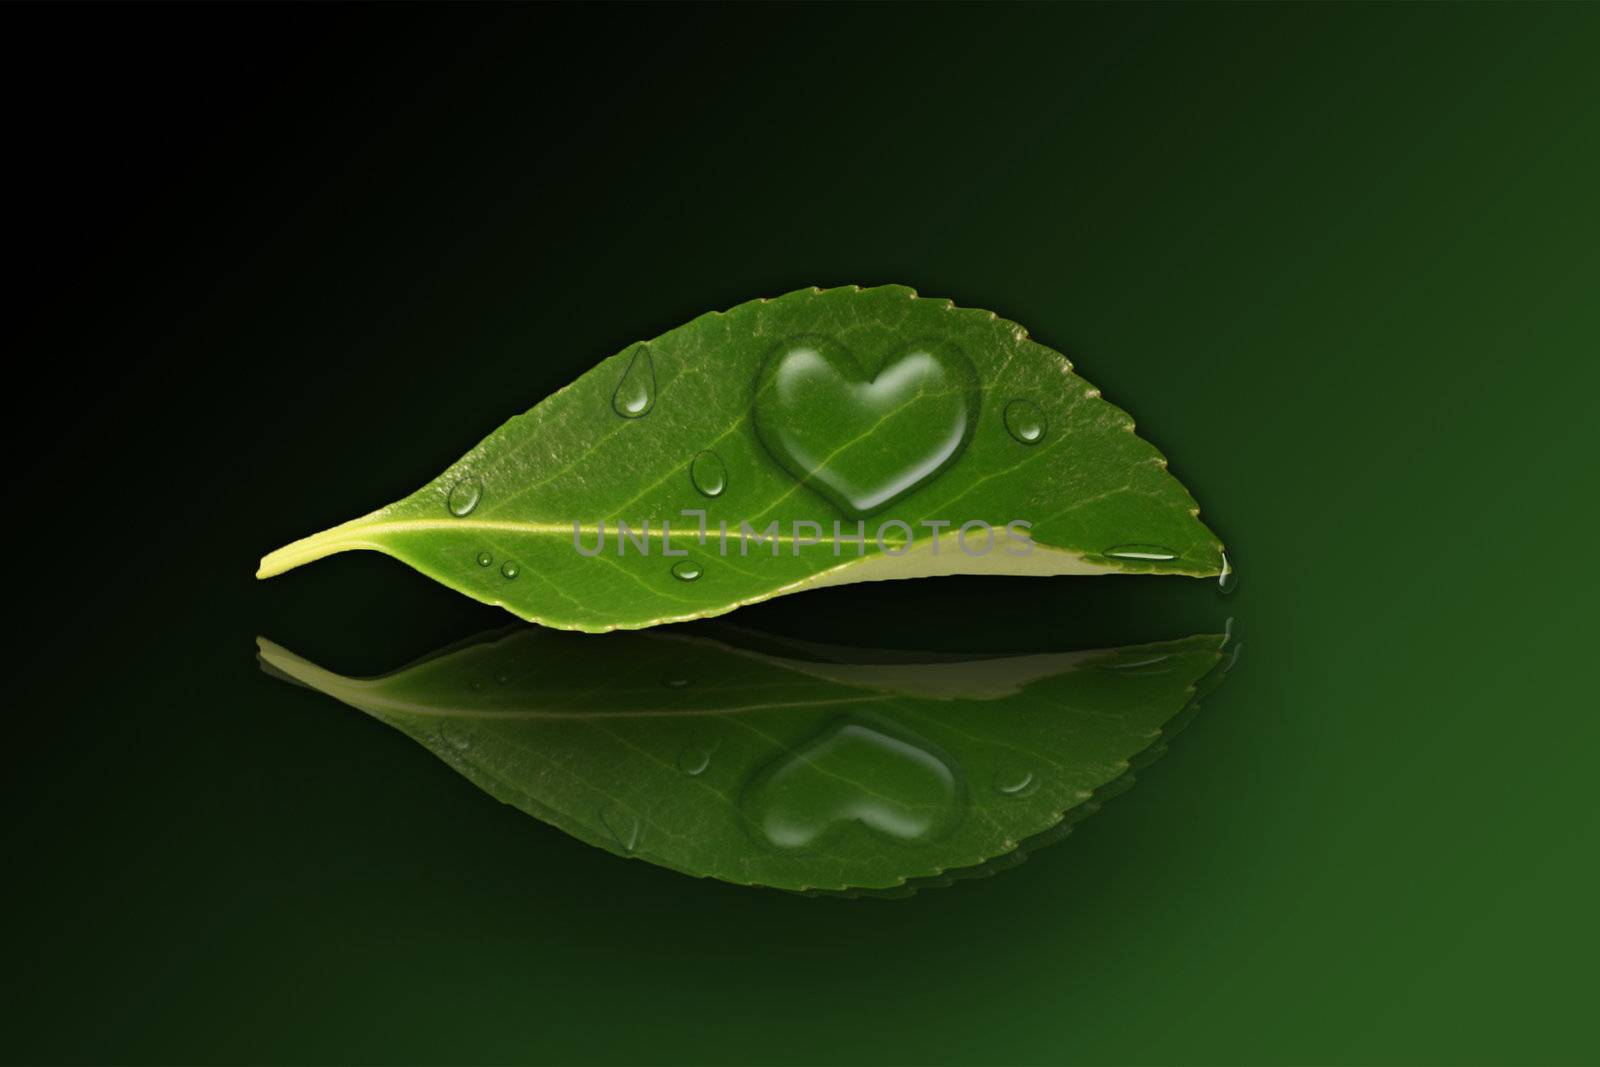 A green leaf with a heart shape droplet on a reflecting ground.